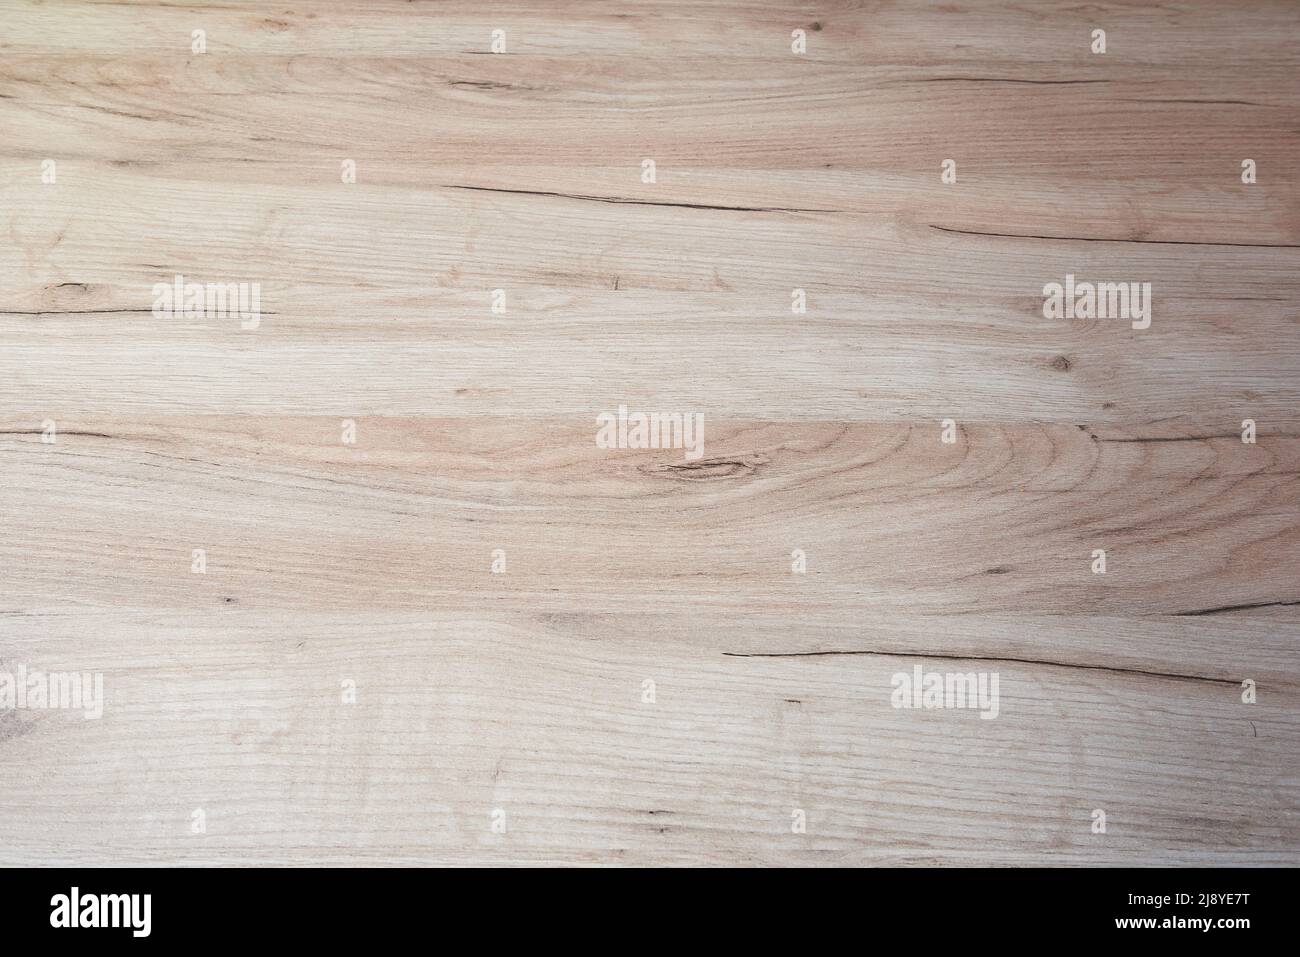 Empty wood texture from desk. Detail view Stock Photo